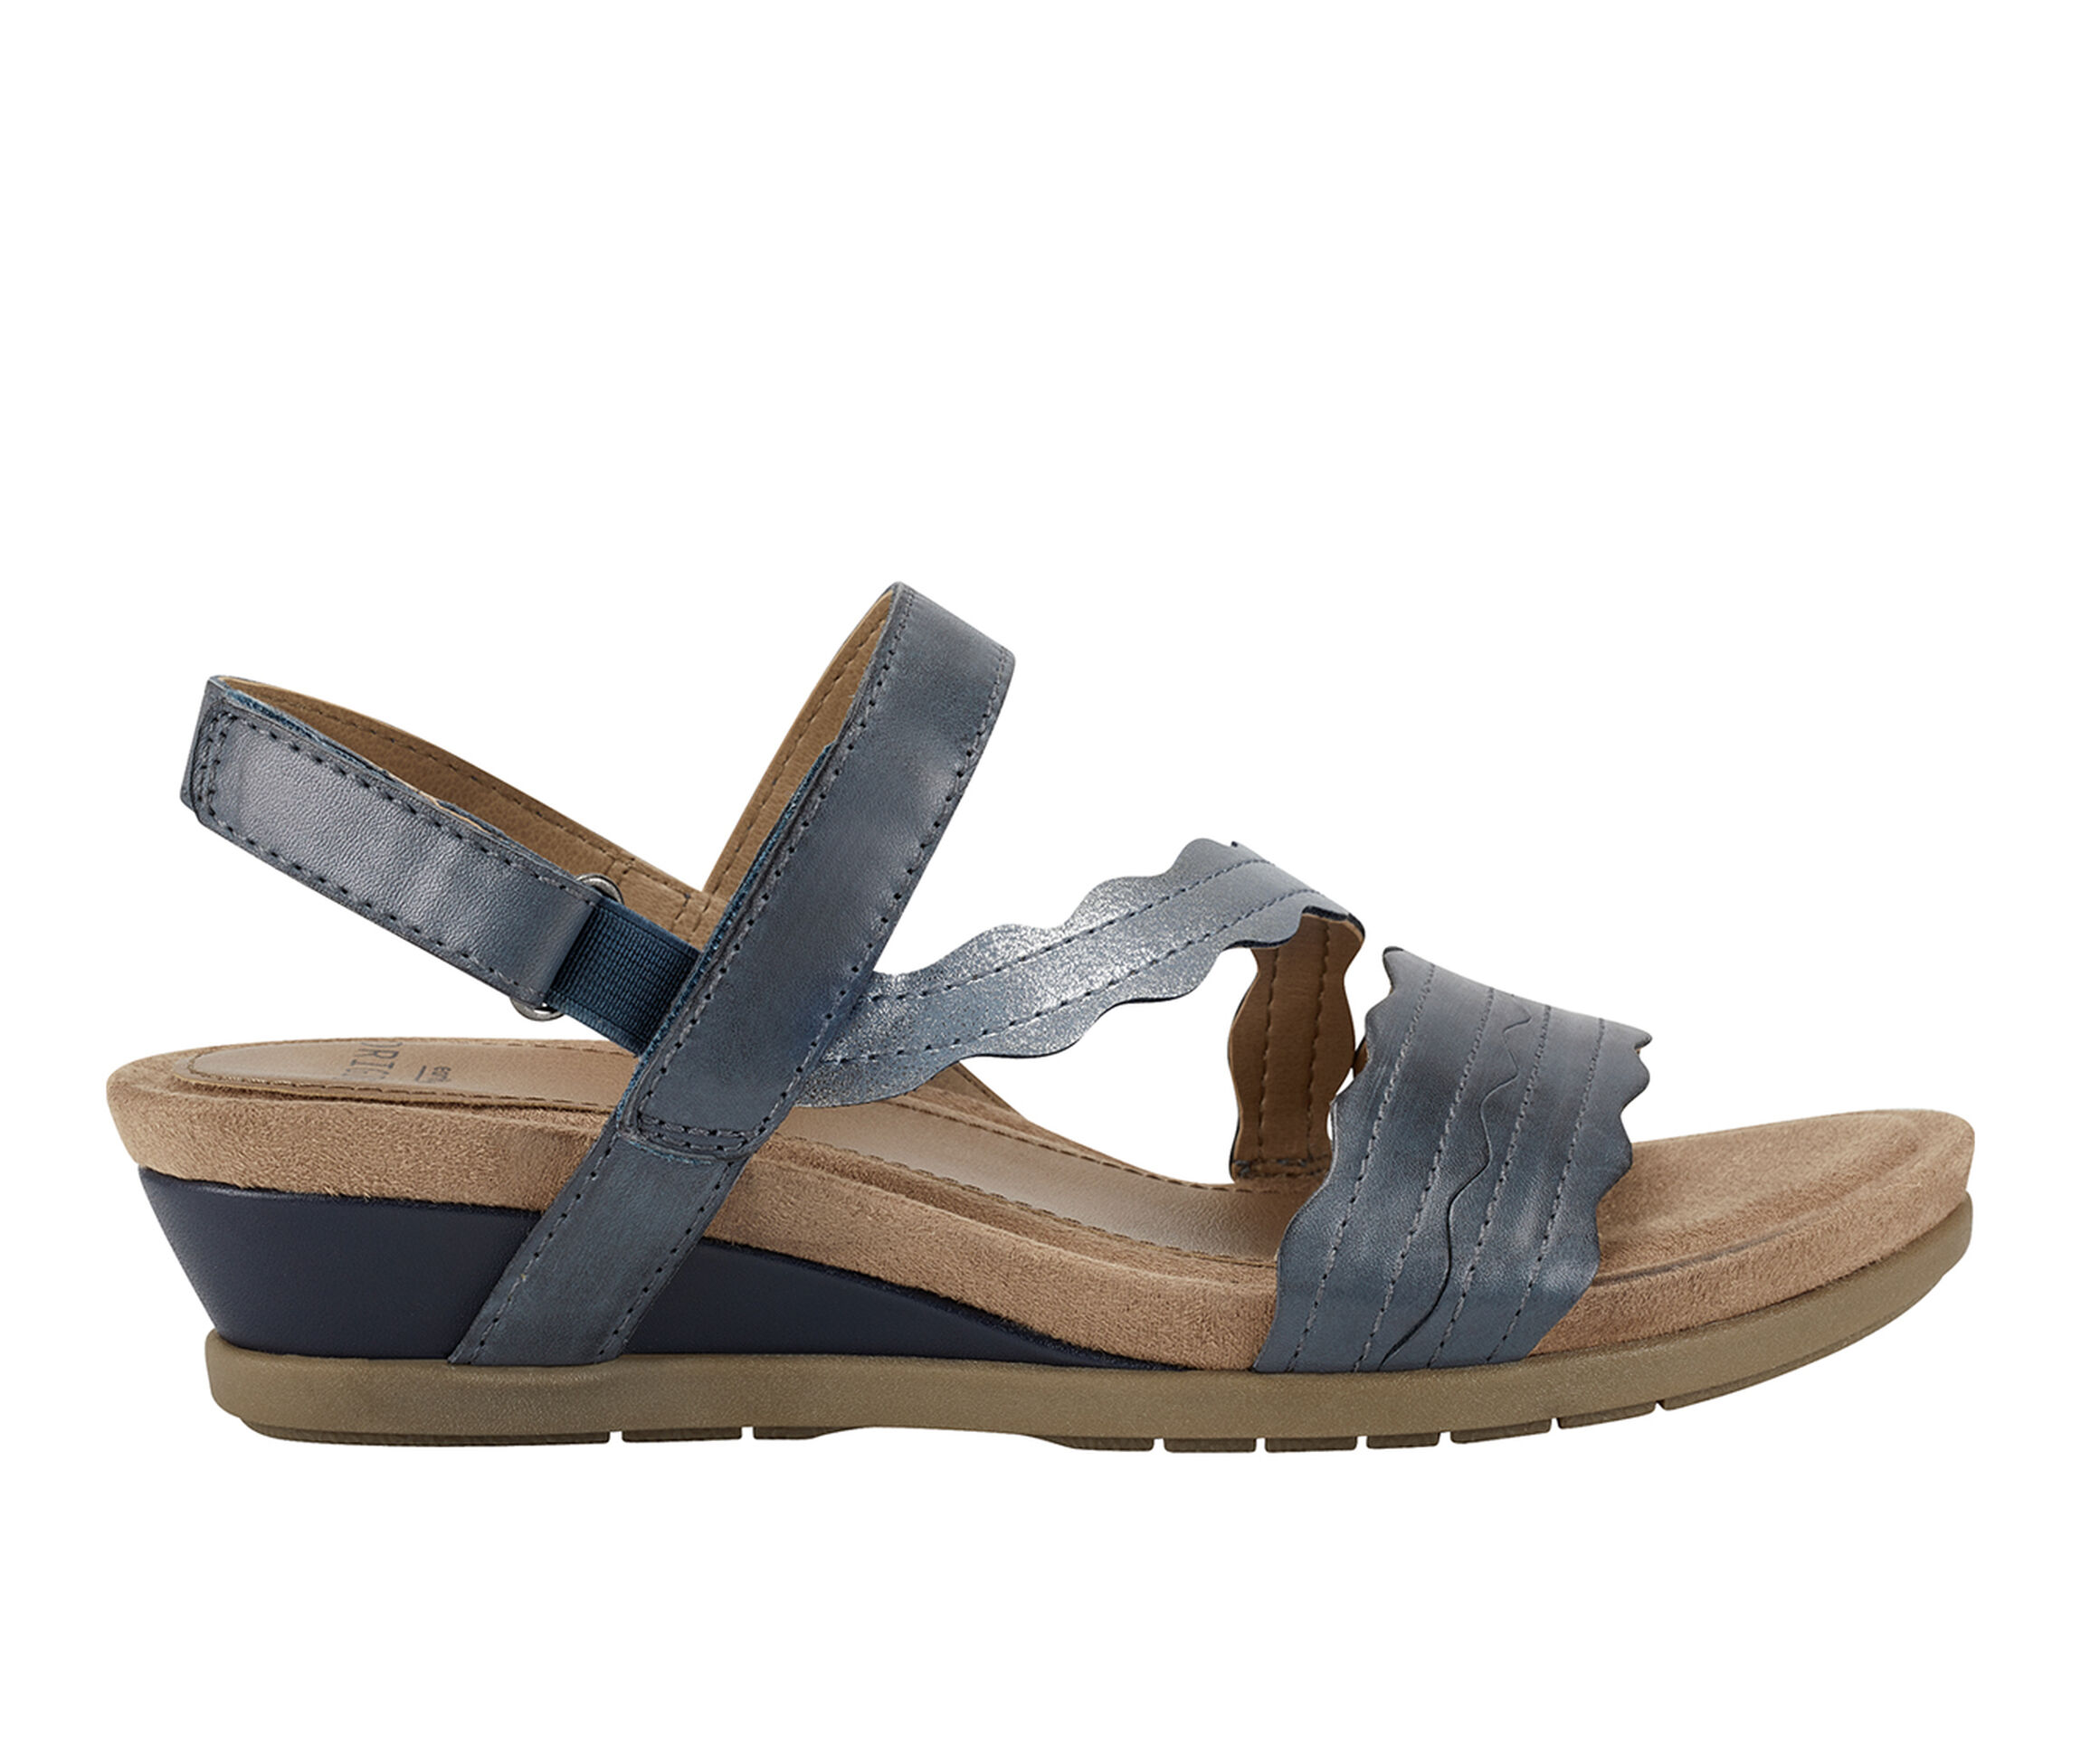 Get the Women's Earth Origins Poppy Wedge Sandals in Admiral Blue W Size  7.5 Wide from Shoe Carnival now | AccuWeather Shop